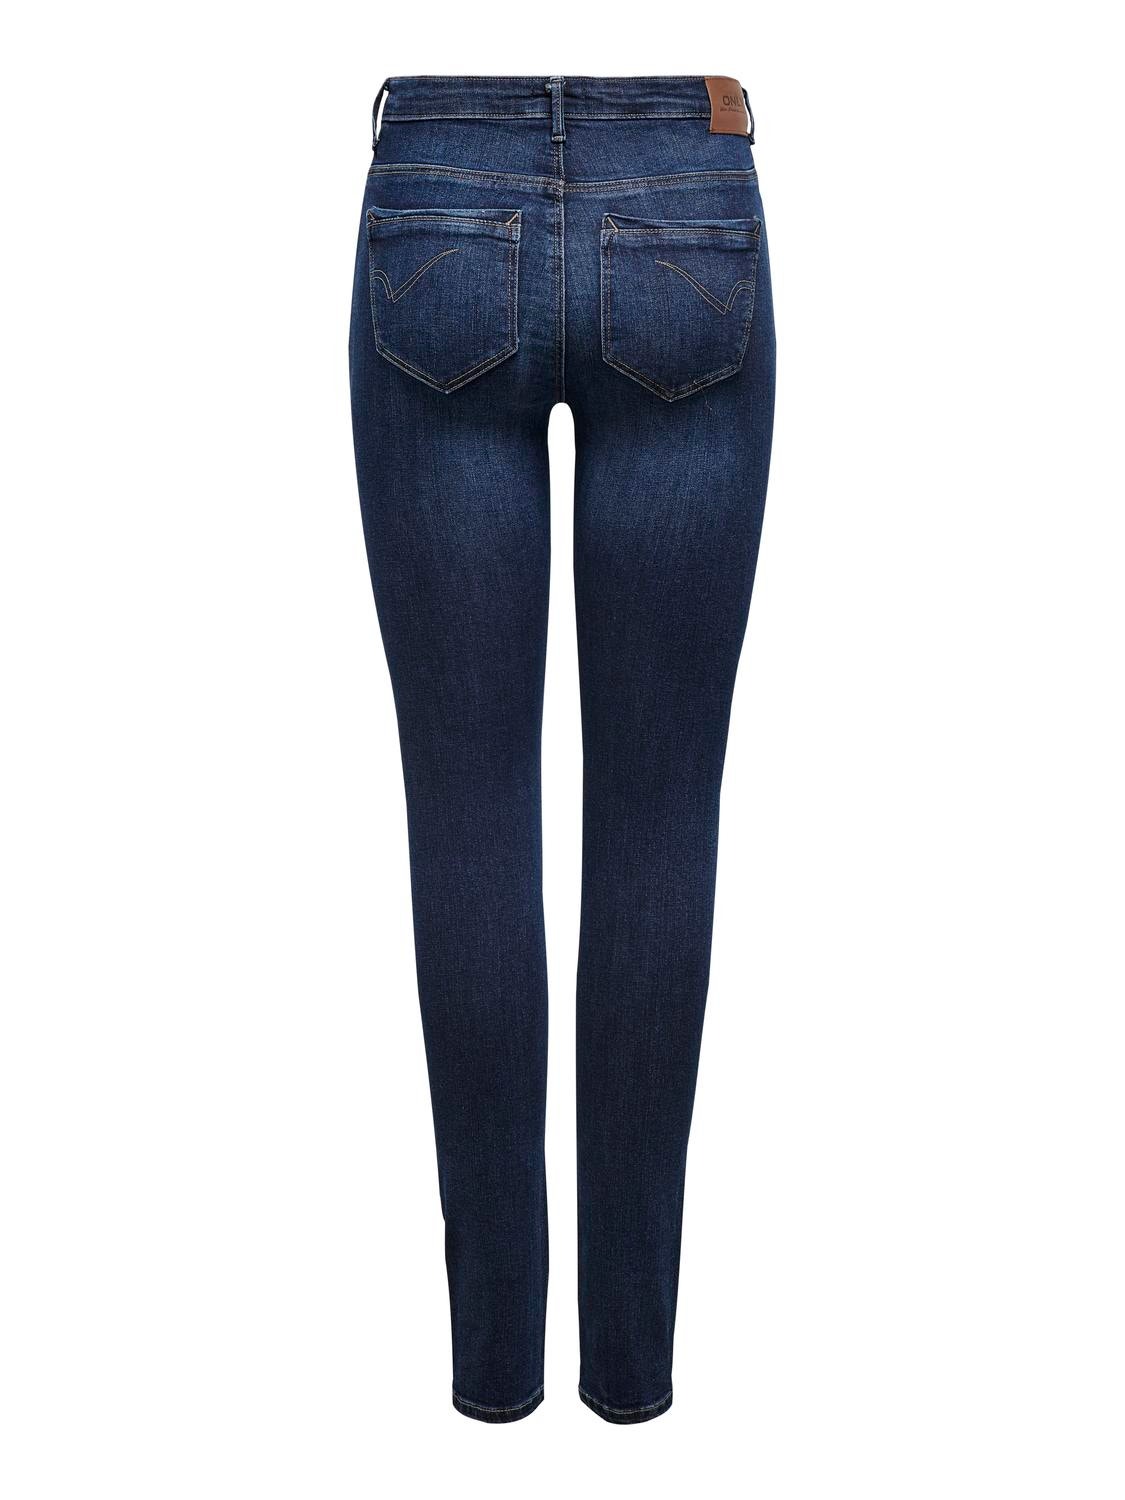 ONLY Skinny Fit Hohe Taille Jeans -Dark Blue Denim - 15165780